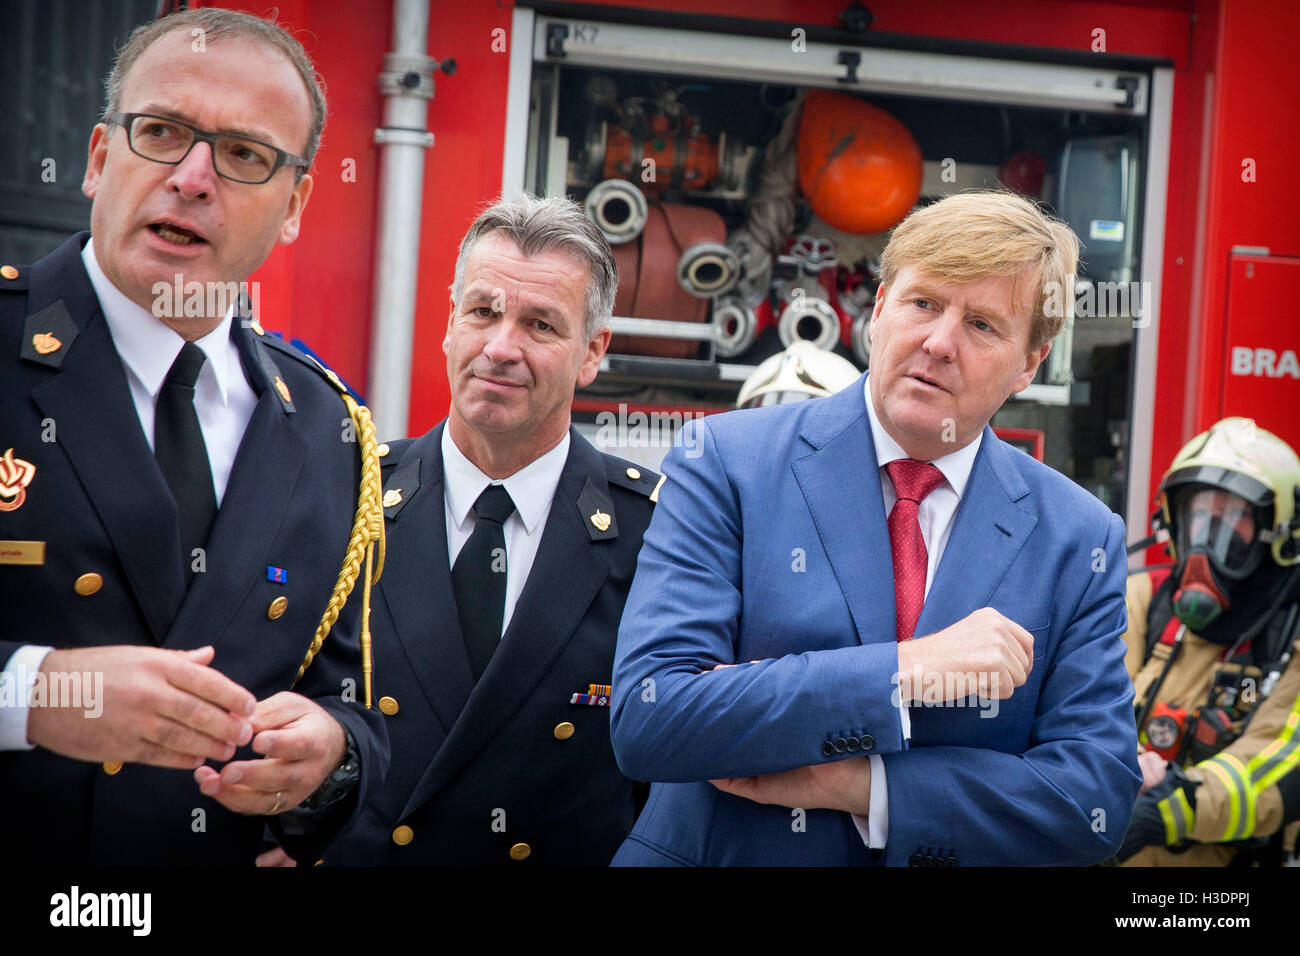 Deurningen, The Netherlands. 6th Oct, 2016. King Willem-Alexander of The Netherlands (R) visits the Twente Safety Campus in Deurningen, The Netherlands, 6 October 2016. At the campus school children and the elderly how to react in dangerous situations. Photo: Patrick van Katwijk//POINT DE VUE OUT/dpa/Alamy Live News Stock Photo